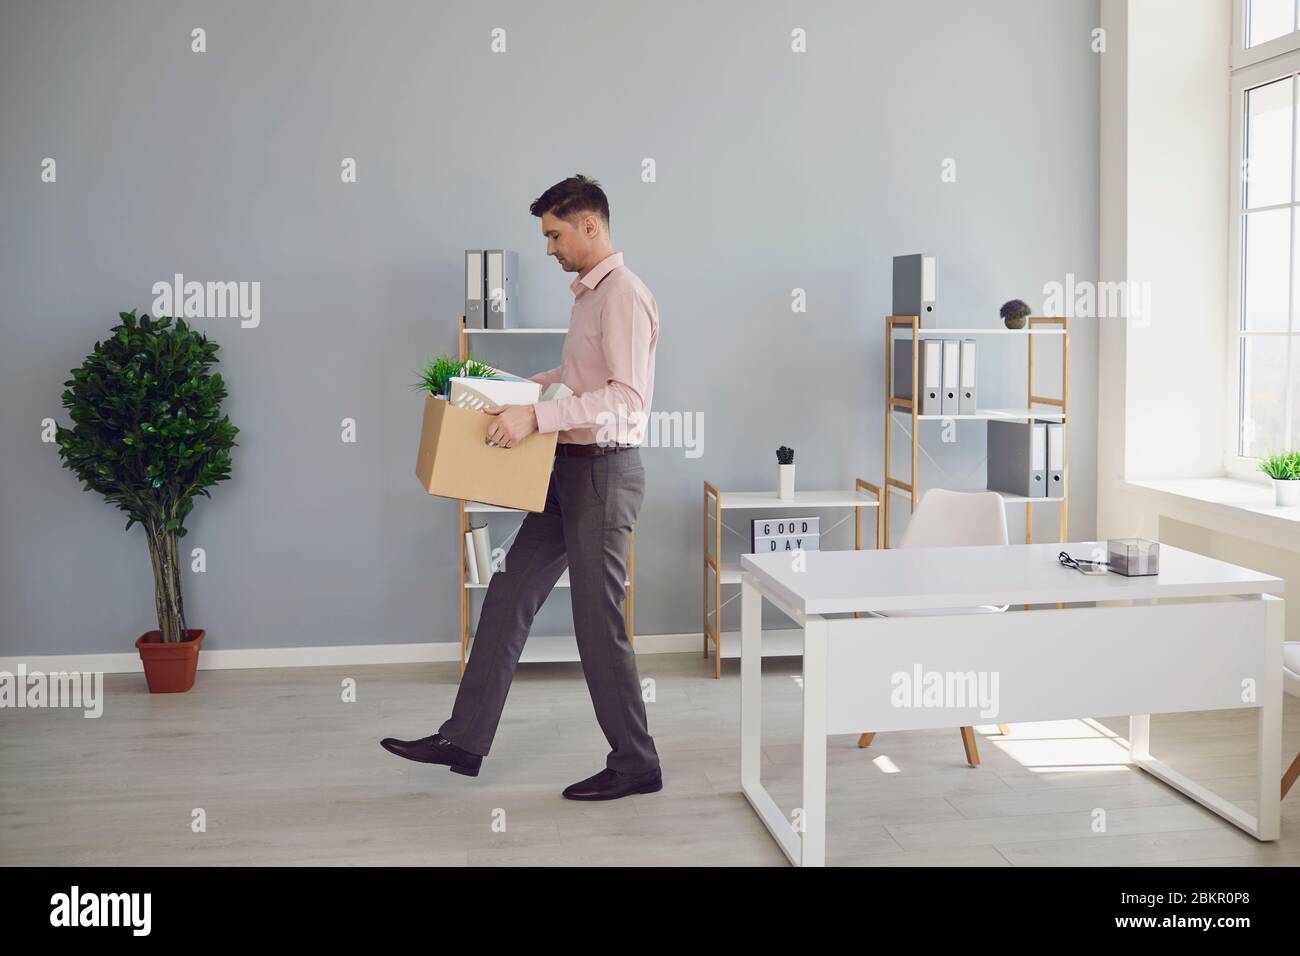 Unemployment. Dismissal. Dismissed An unemployed man with a box is walking out of the office in search of a new job. Stock Photo